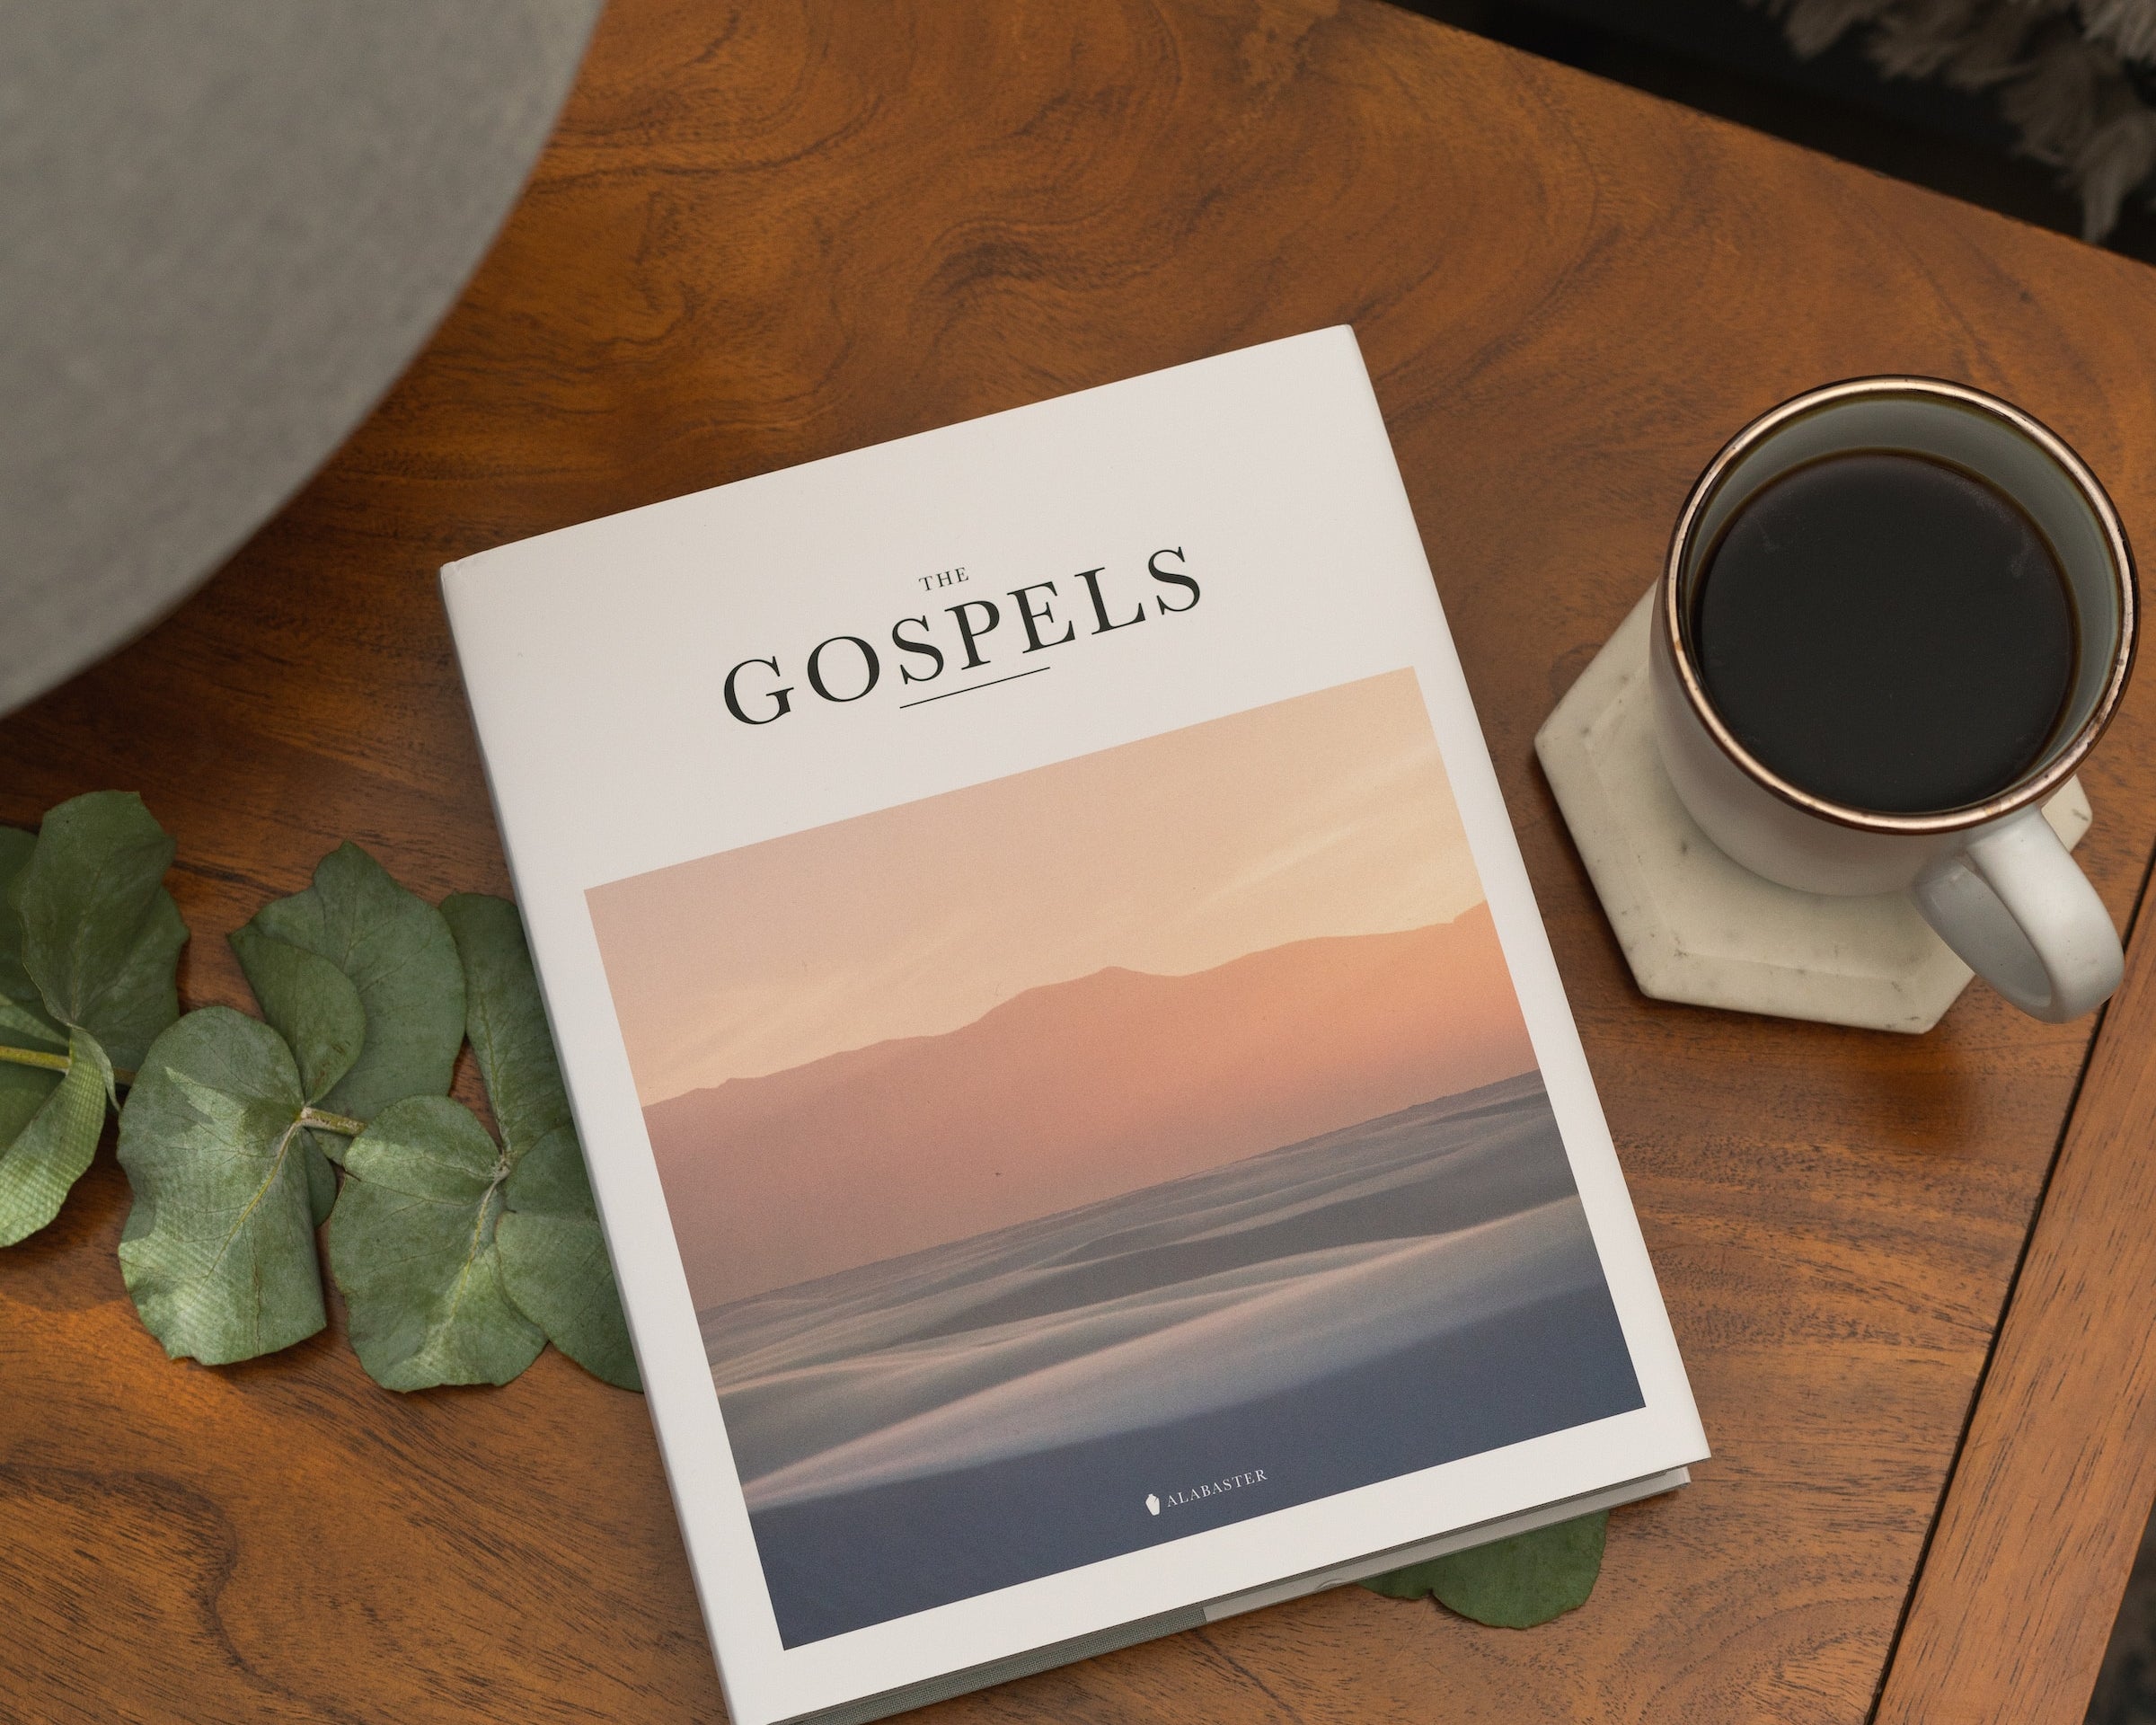 Alabaster's Gospels Hardcover on a coffee table by a cup of coffee